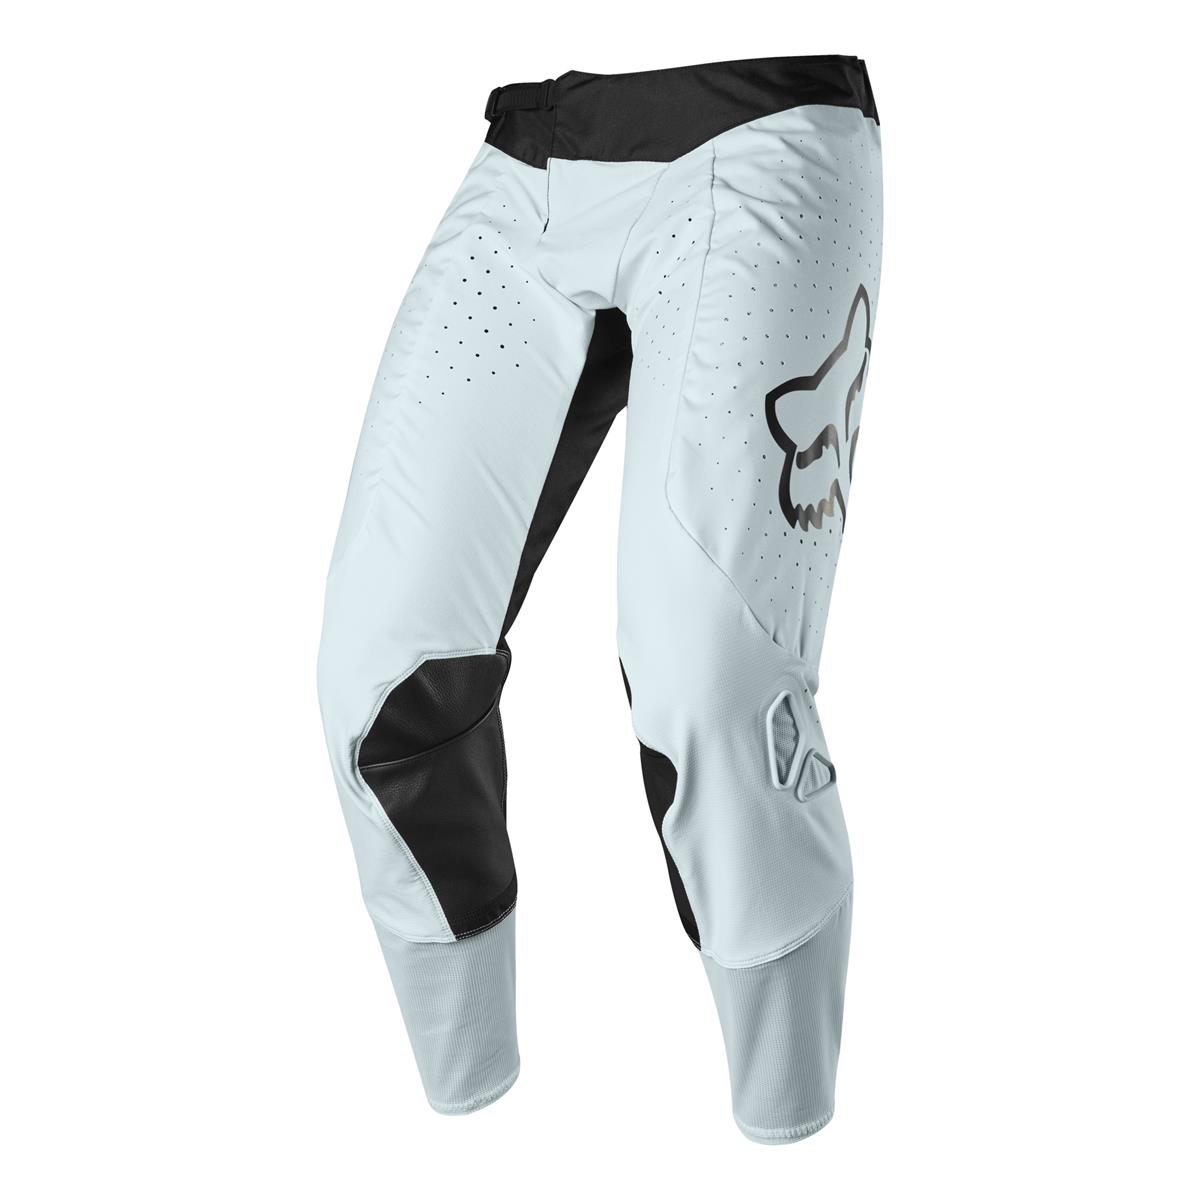 Fox MX Pants Airline Ice - Limited Edition Weld